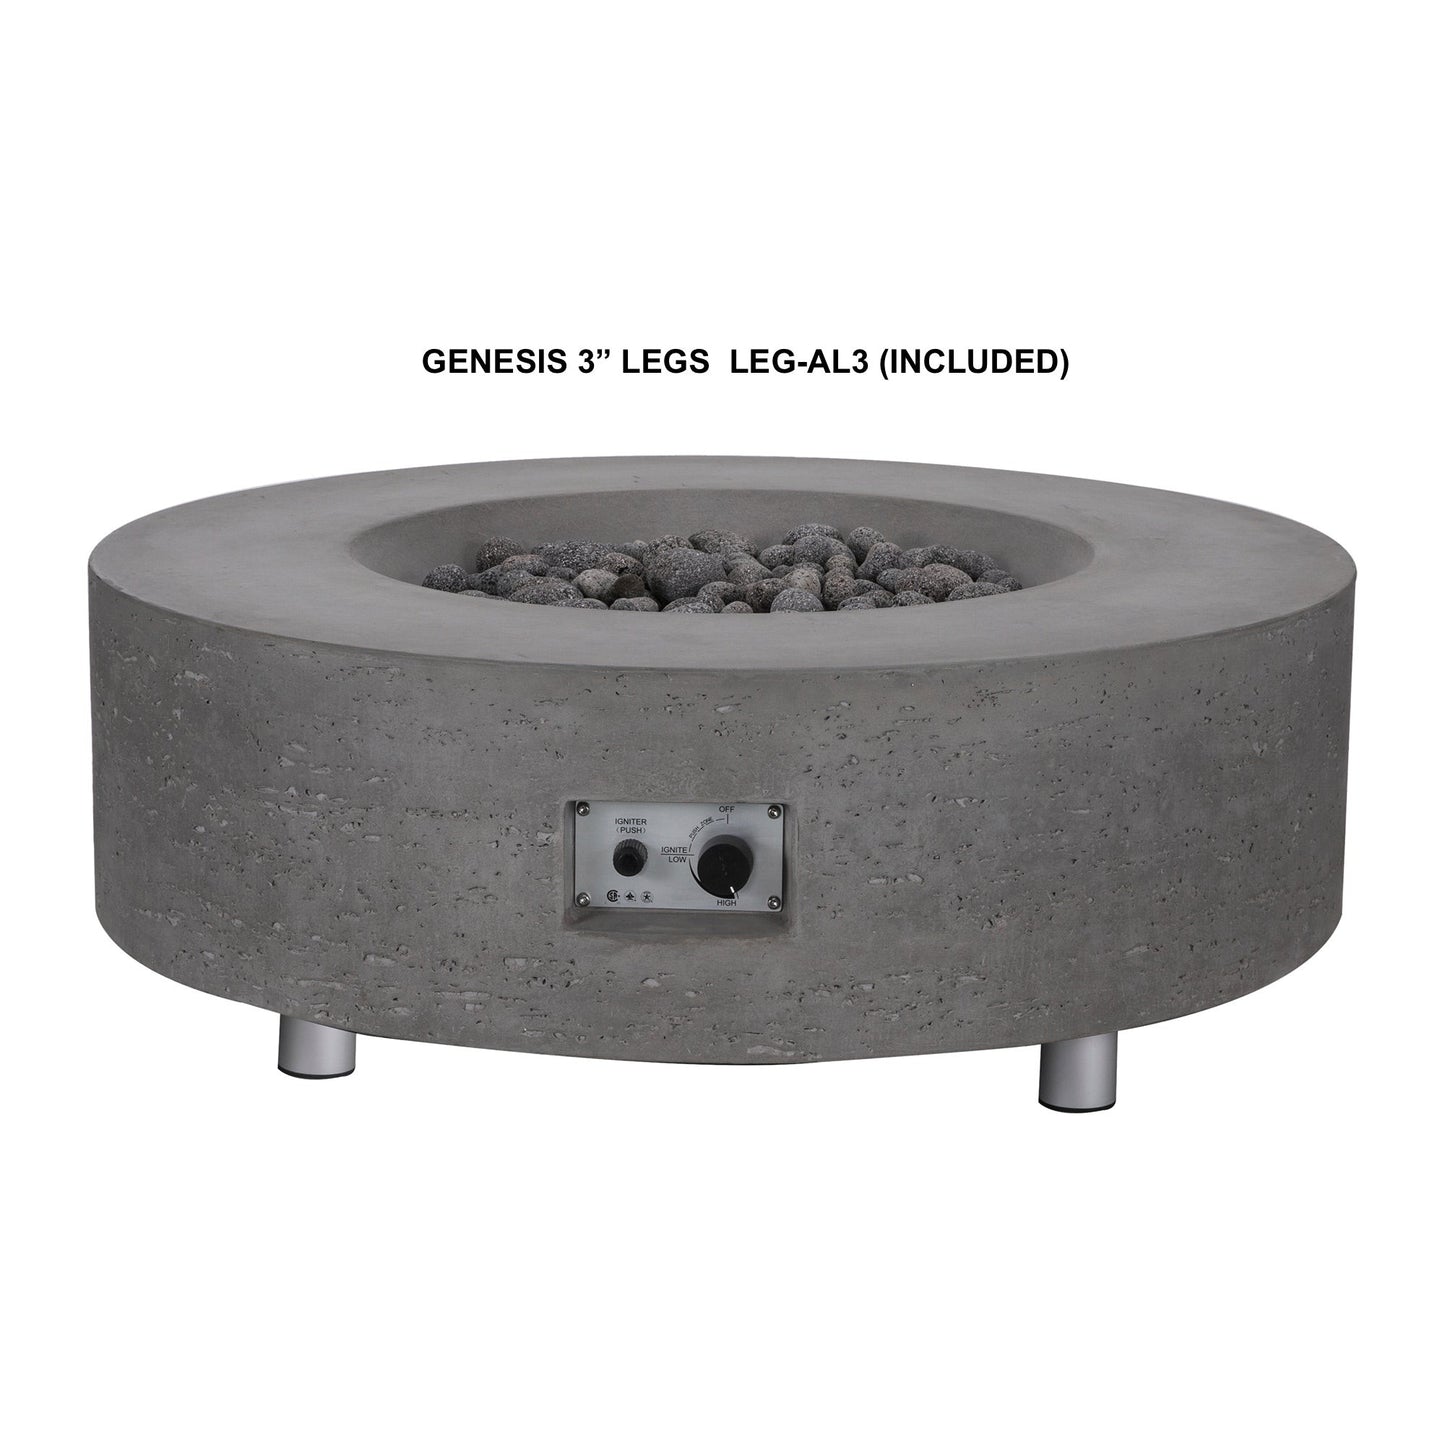 PyroMania Genesis 41" Round Charcoal Outdoor Propane Gas Fire Pit Table